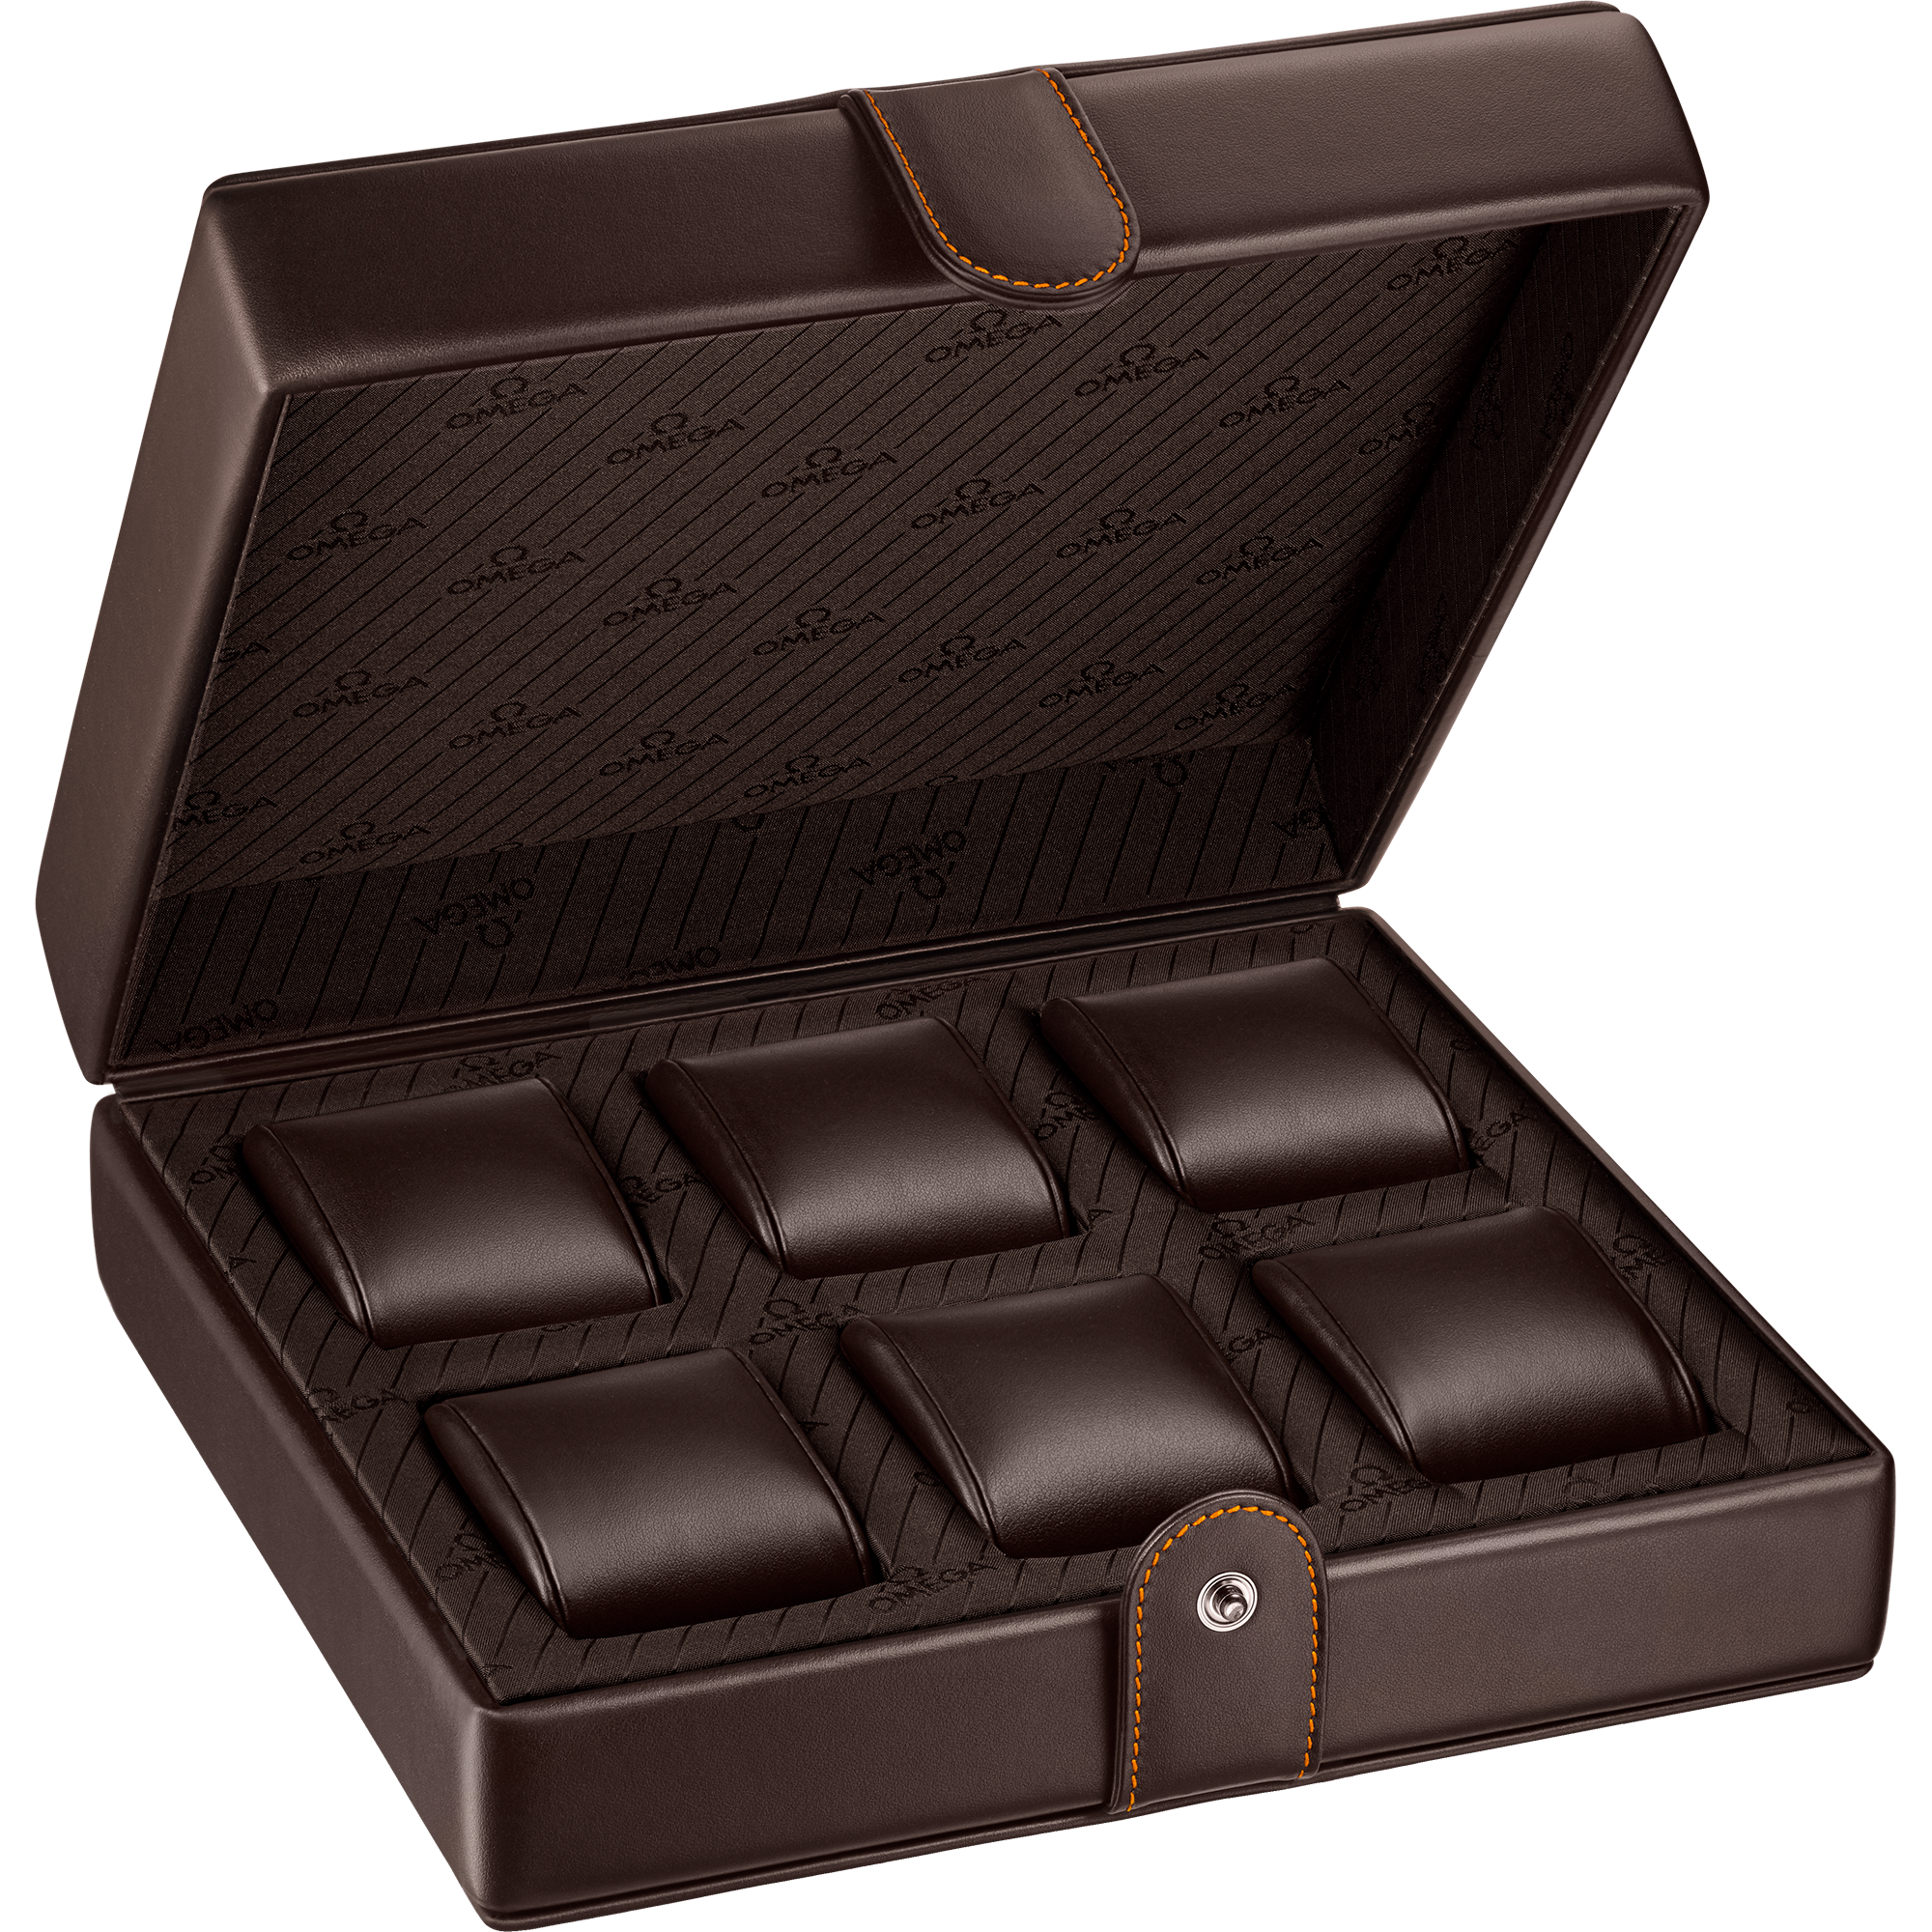 Fine Leather Watch box, Brown - 7070320012